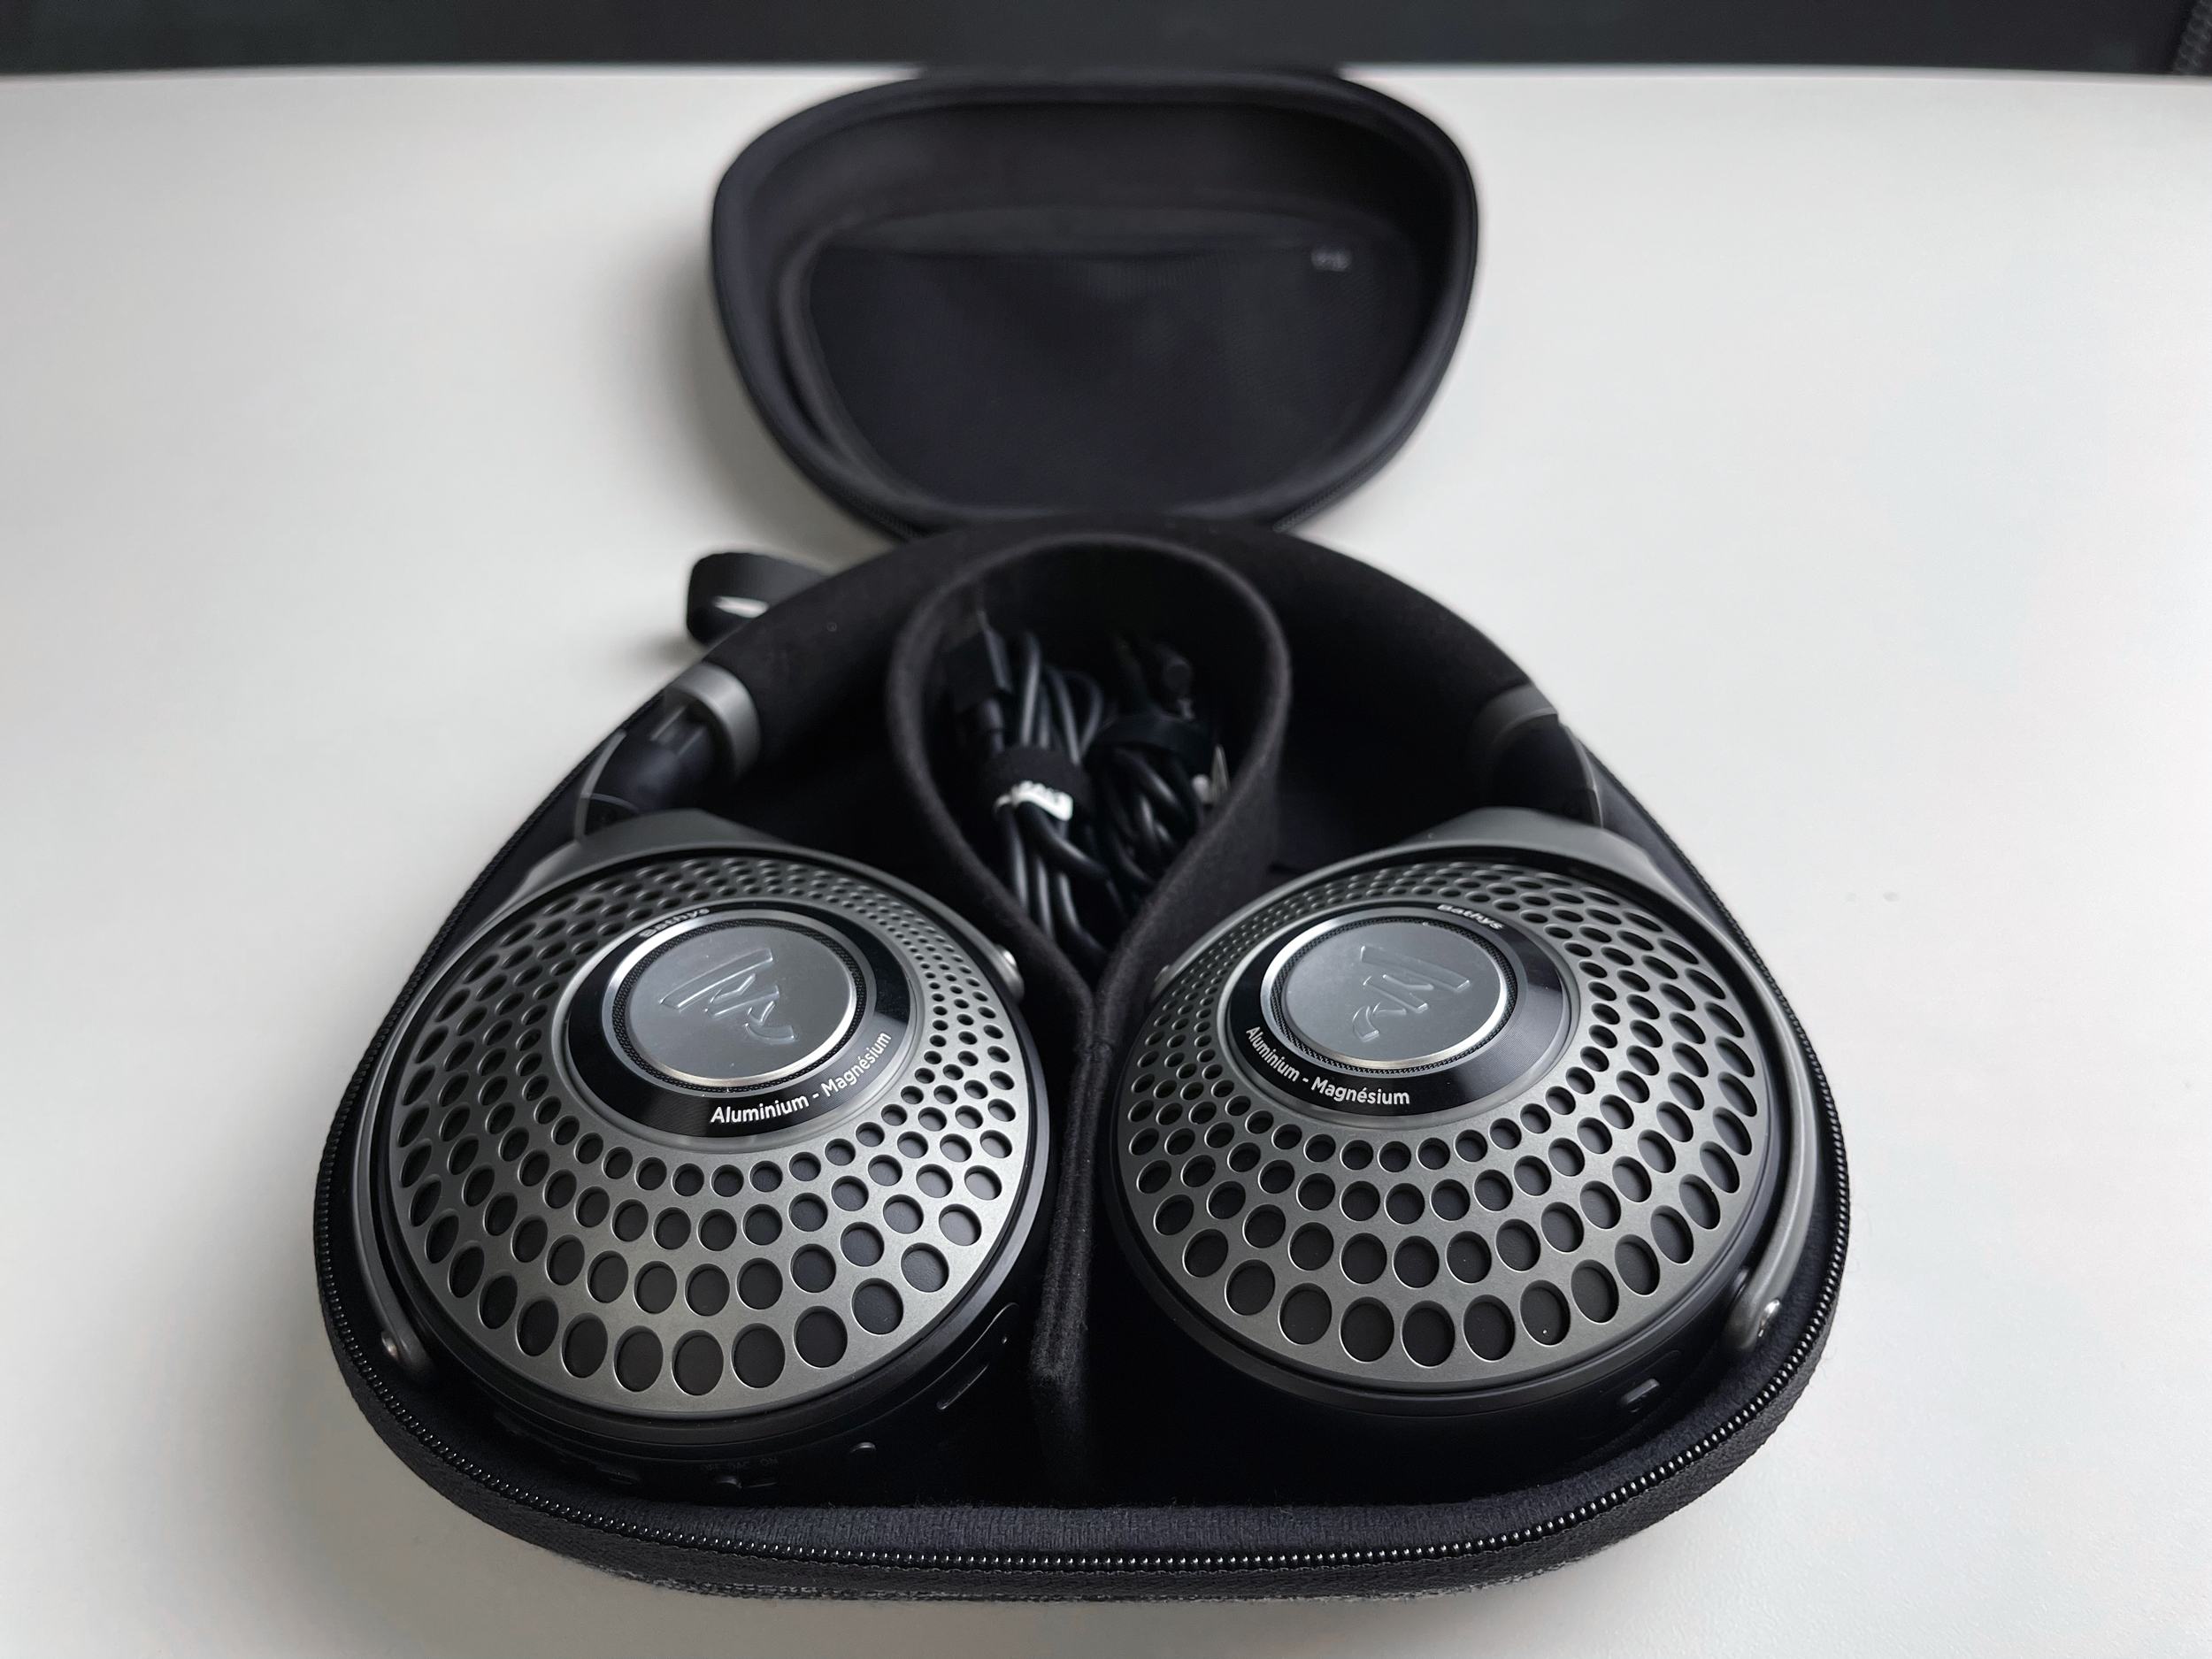 Focal Bathys Wireless Headphone Review. AWESOME!